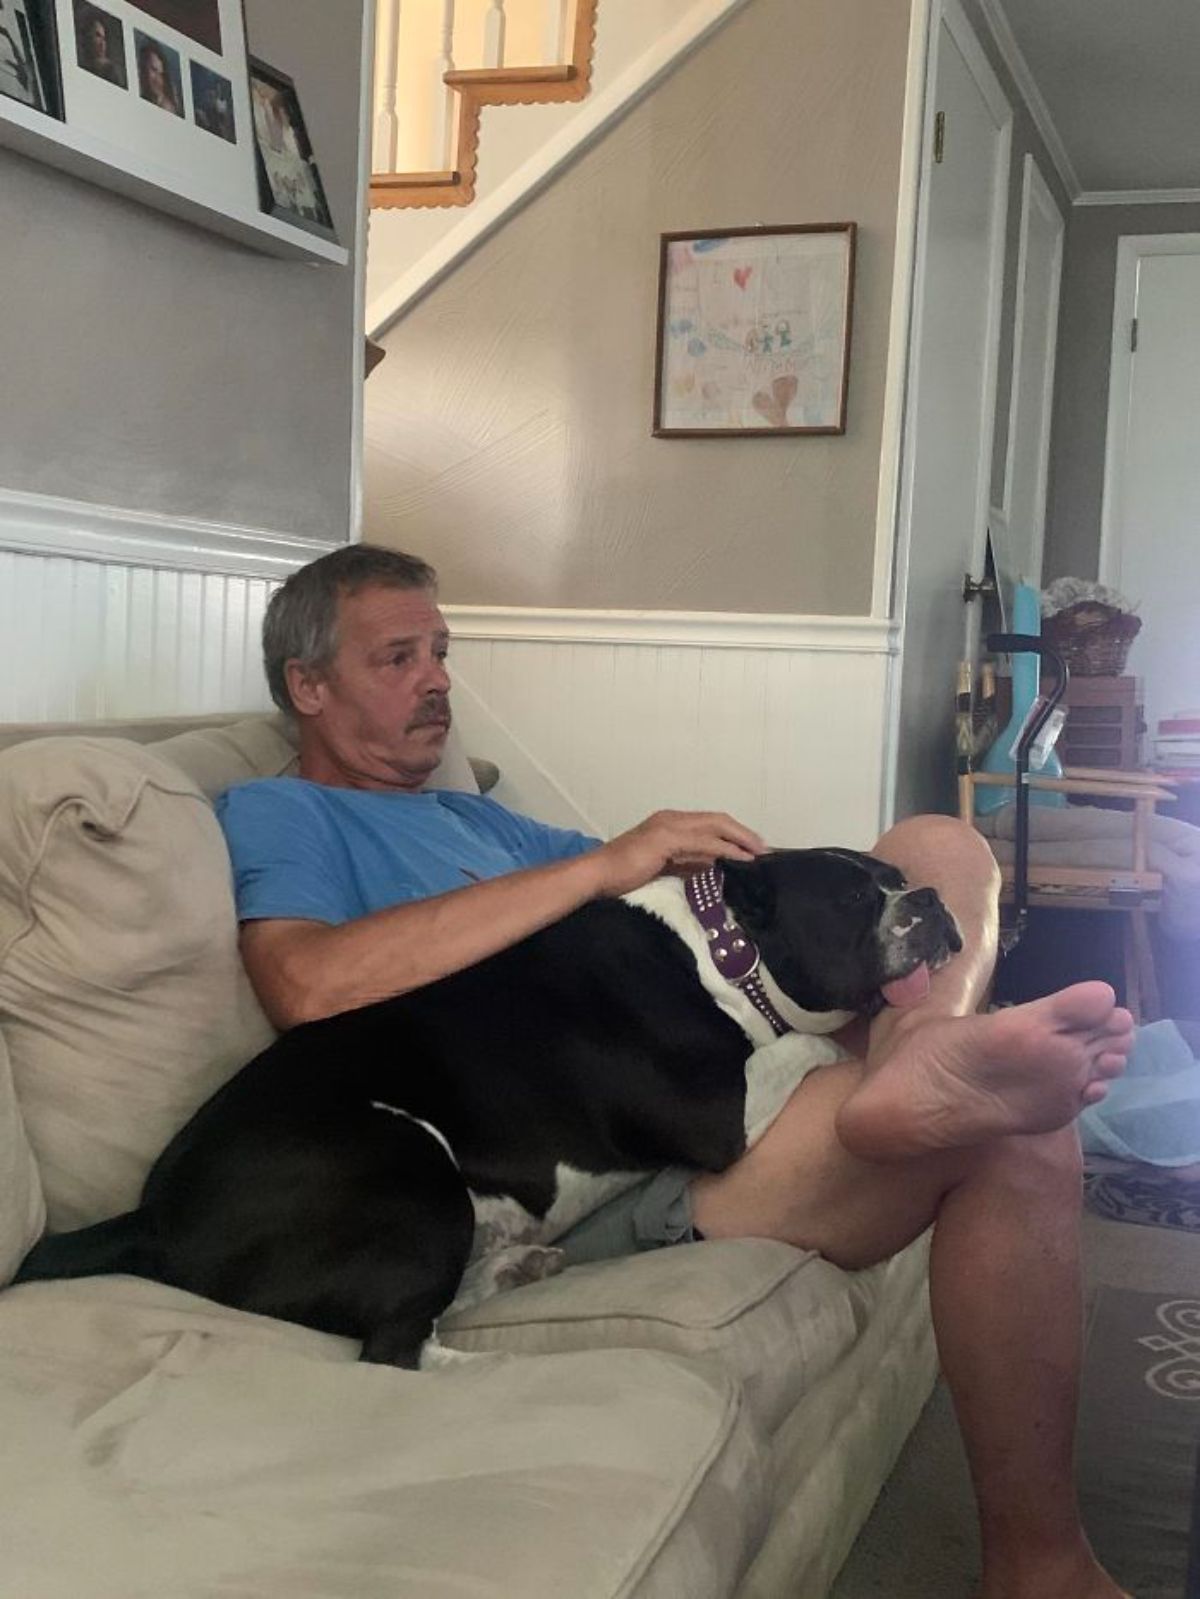 black and white dog with the tongue sticking out the side laying on a man's lap and getting petted